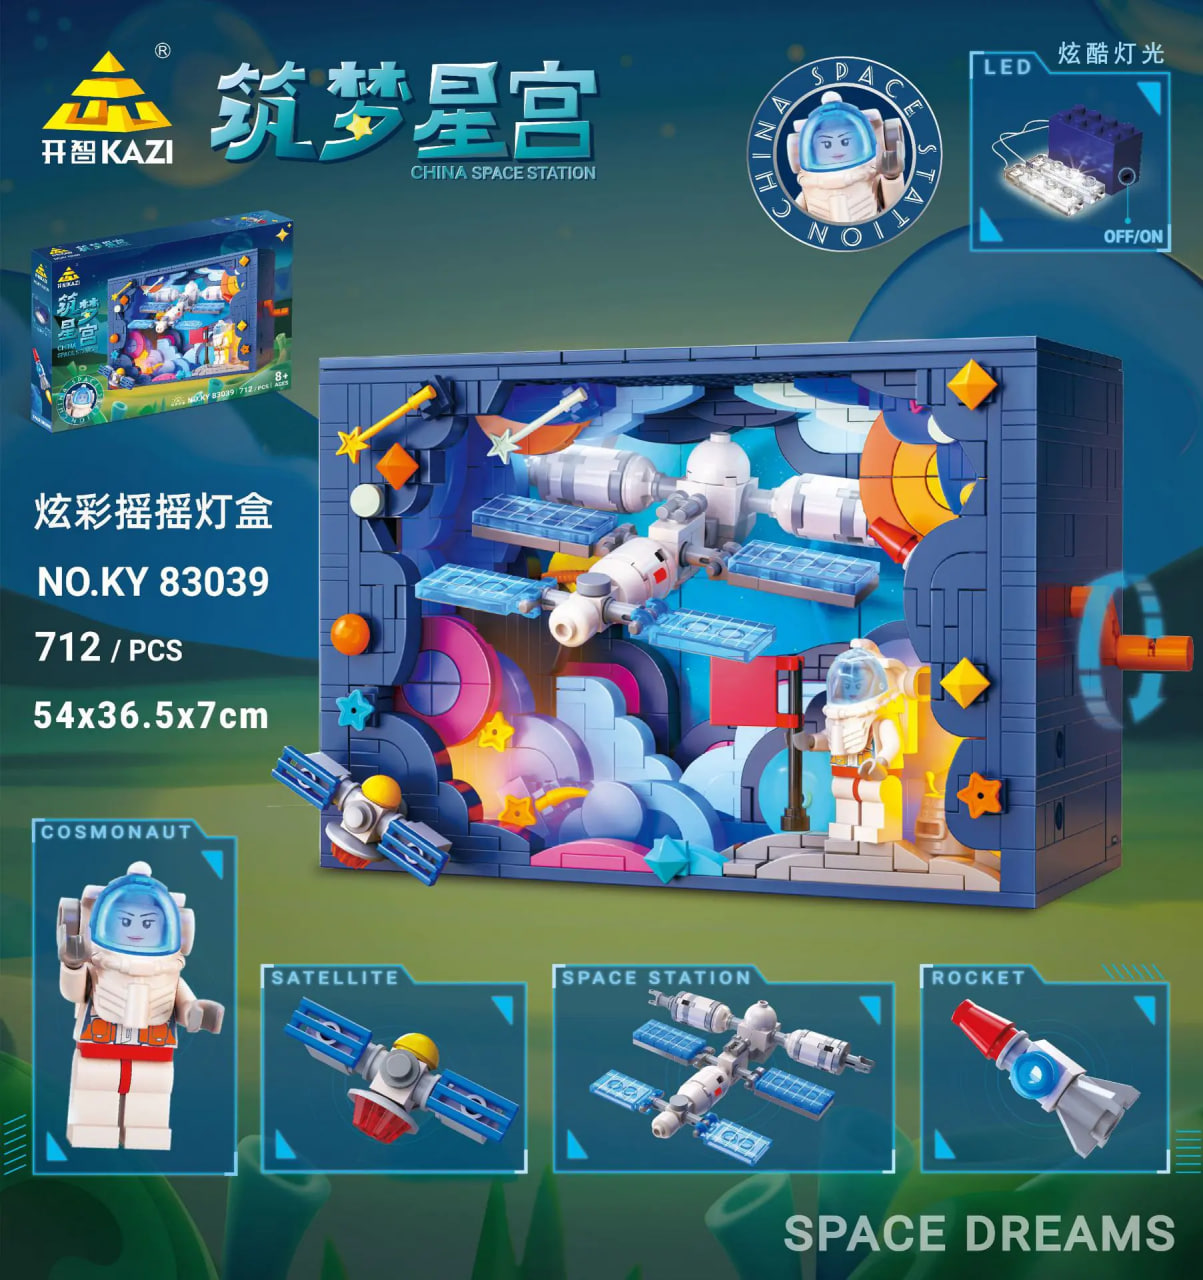 KAZI KY83039 Building a Dream Star Palace China Space Station With 712pcs